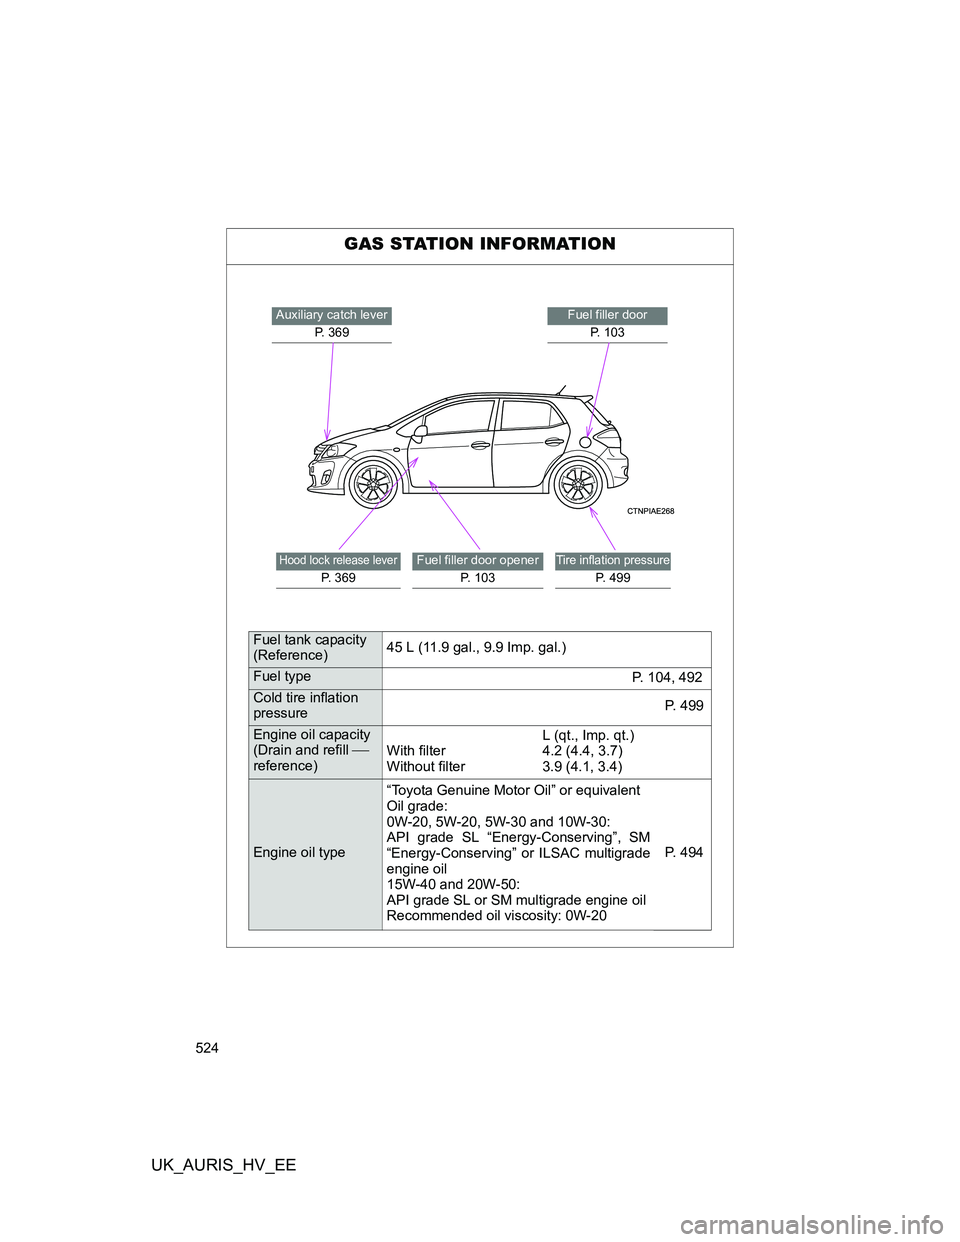 TOYOTA AURIS 2011  Owners Manual (in English) 524
UK_AURIS_HV_EE
GAS STATION INFORMATION
Auxiliary catch lever
P. 369Fuel filler door
P. 103
Hood lock release lever
P.  3 6 9
Fuel filler door opener
P.  1 0 3Tire inflation pressure
P. 499
Fuel ta